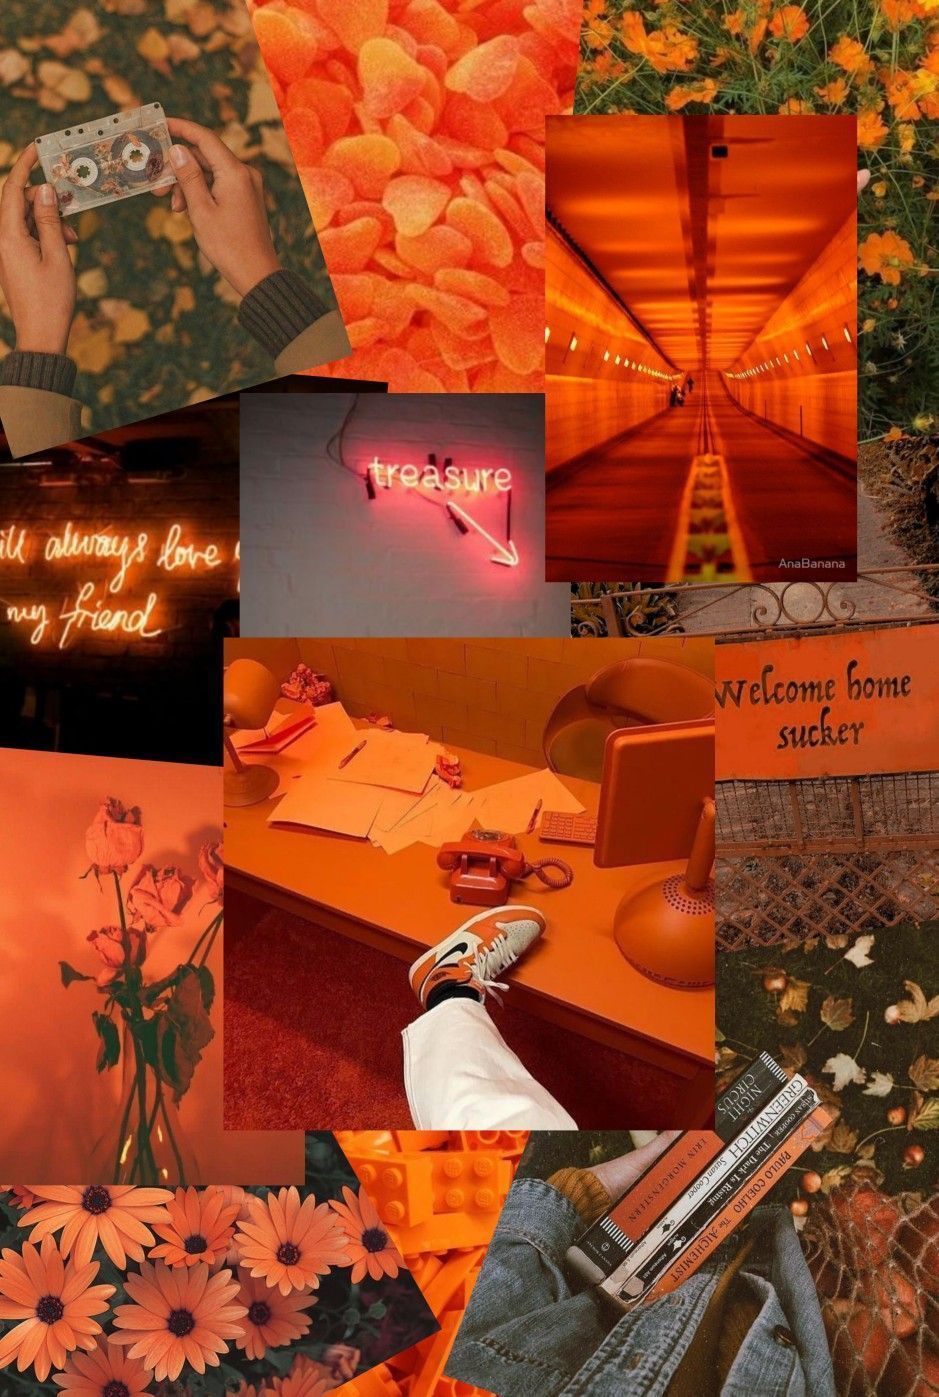 Aesthetic collage of orange and yellow photos - Dark orange, orange, neon orange, pastel orange